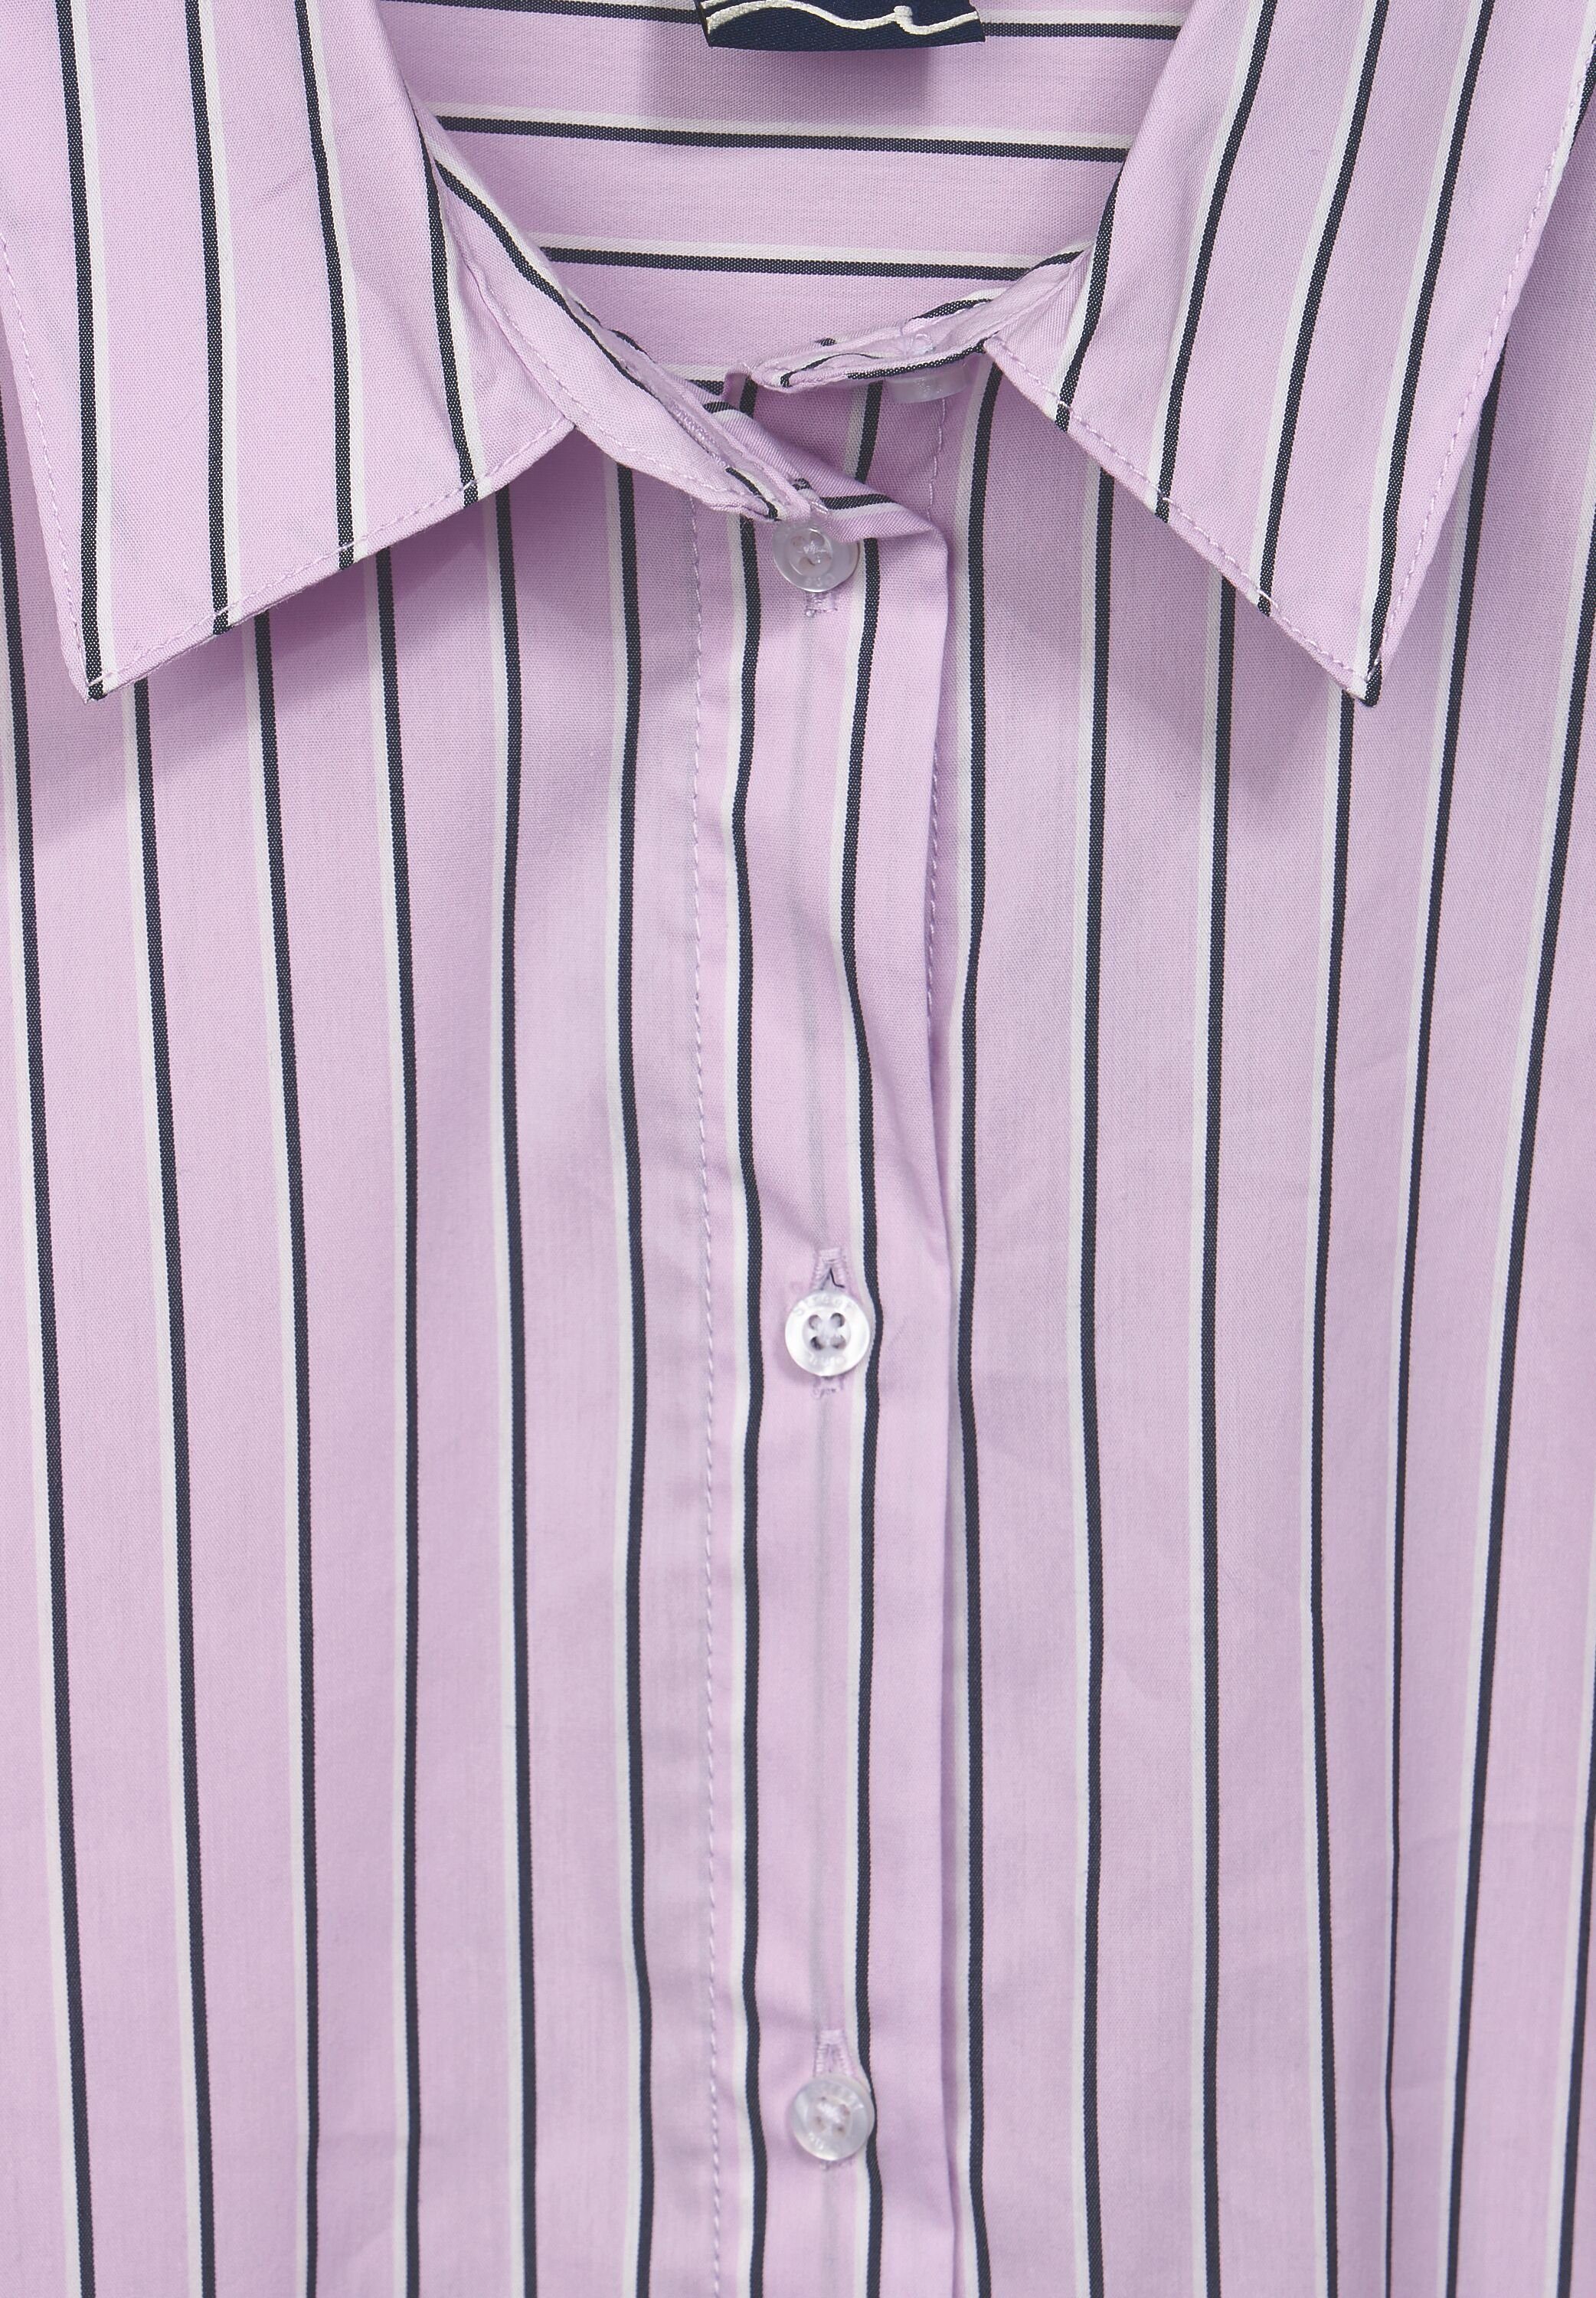 STREET ONE Office soft office Streifenbluse blouse QR Longbluse Striped LTD pure lilac Streifenmuster